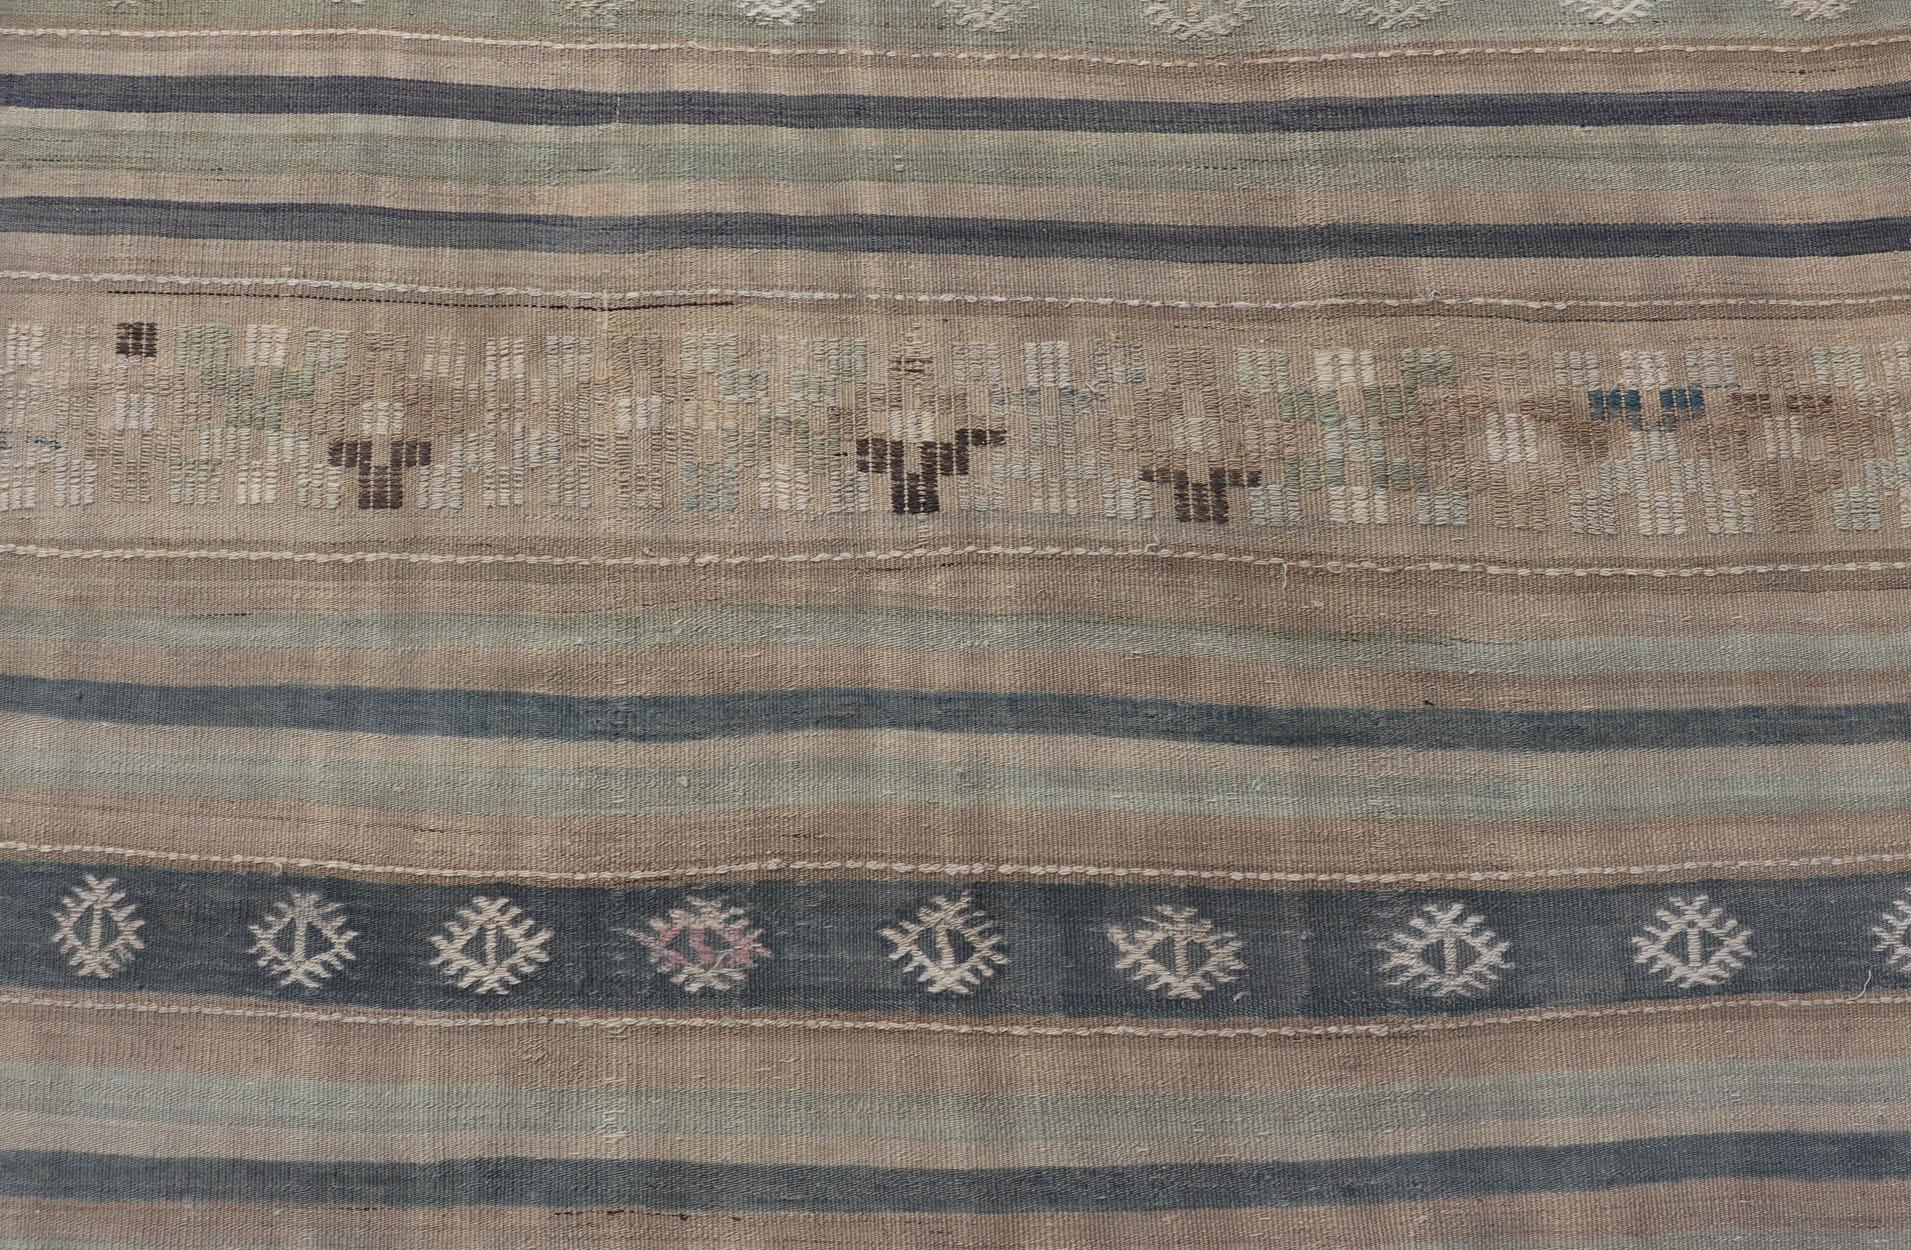 Vintage Hand Woven Turkish Kilim with Stripes in Light Taupe and Neutral Colors For Sale 1